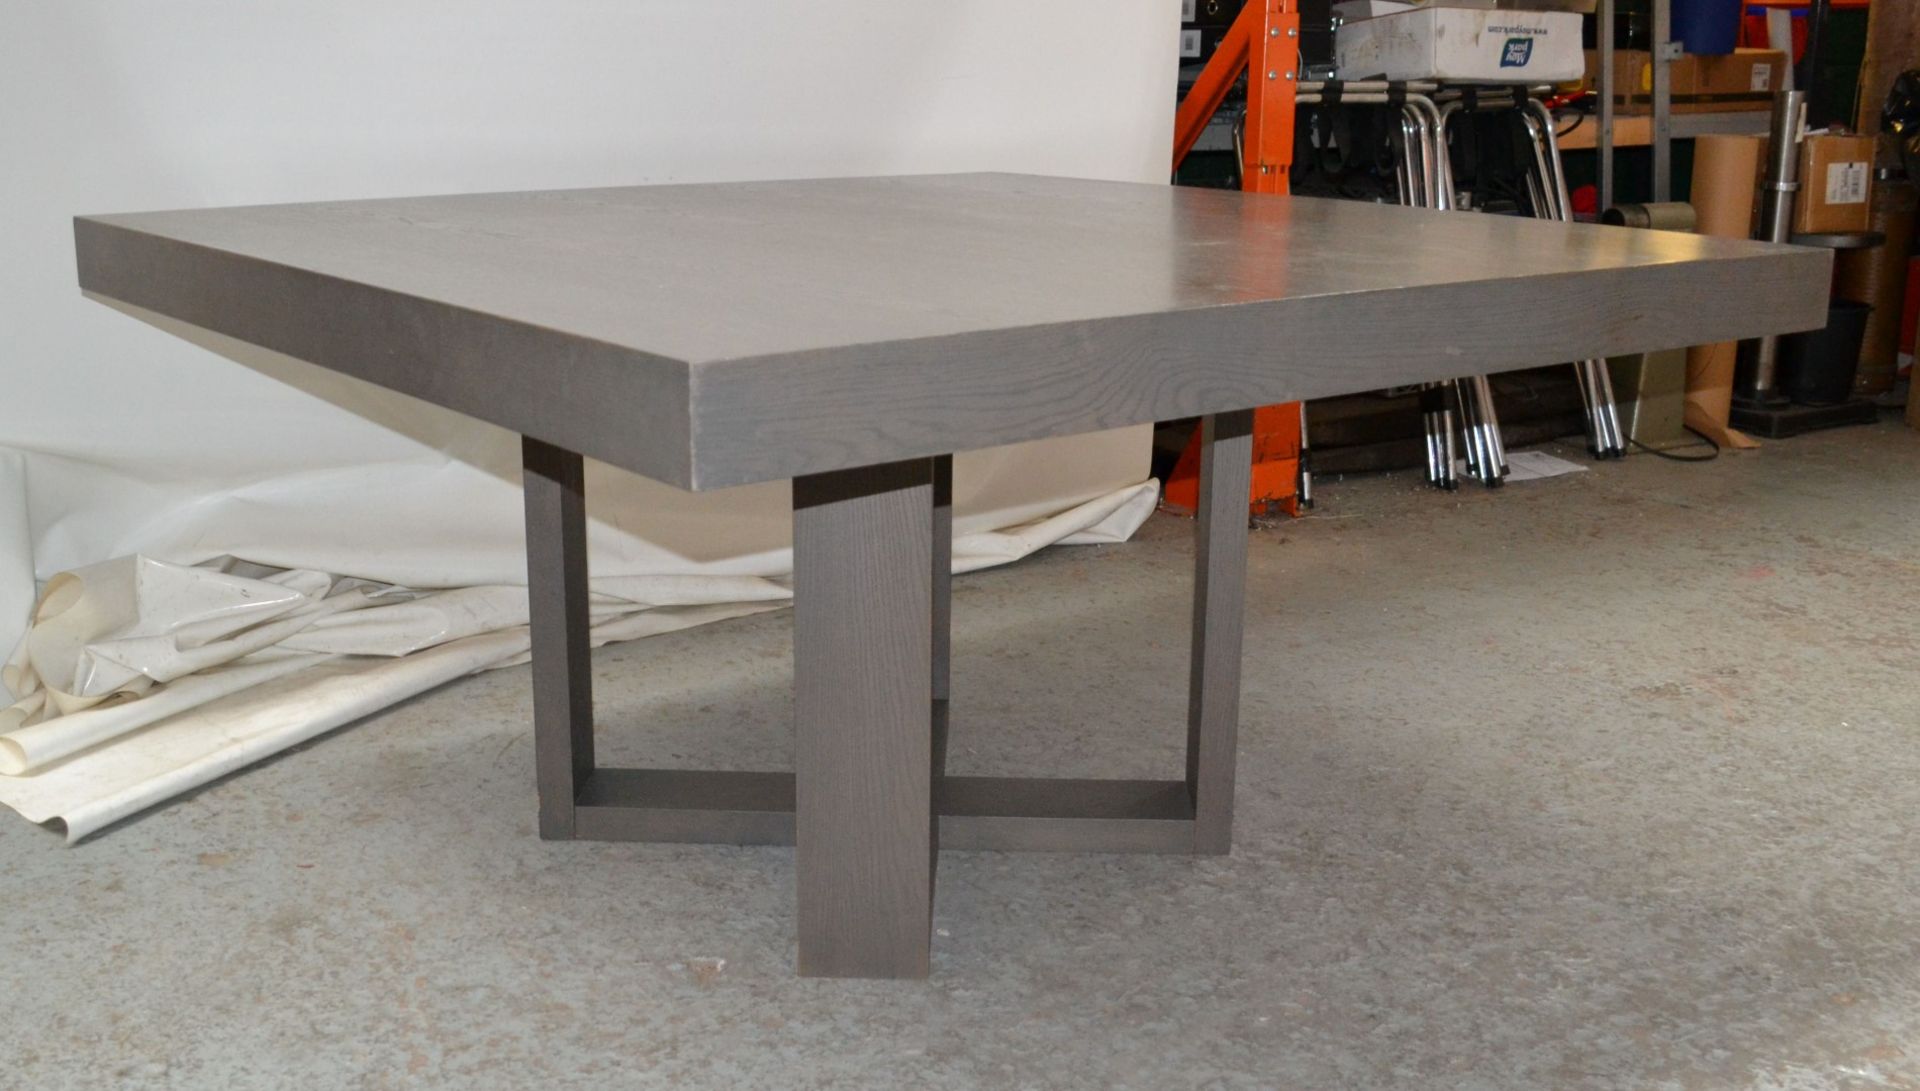 1 x Large Square Wooden Dining Table in a Grey Oak Coloured Finish - CL314 - Location: Altrincham - Image 3 of 10